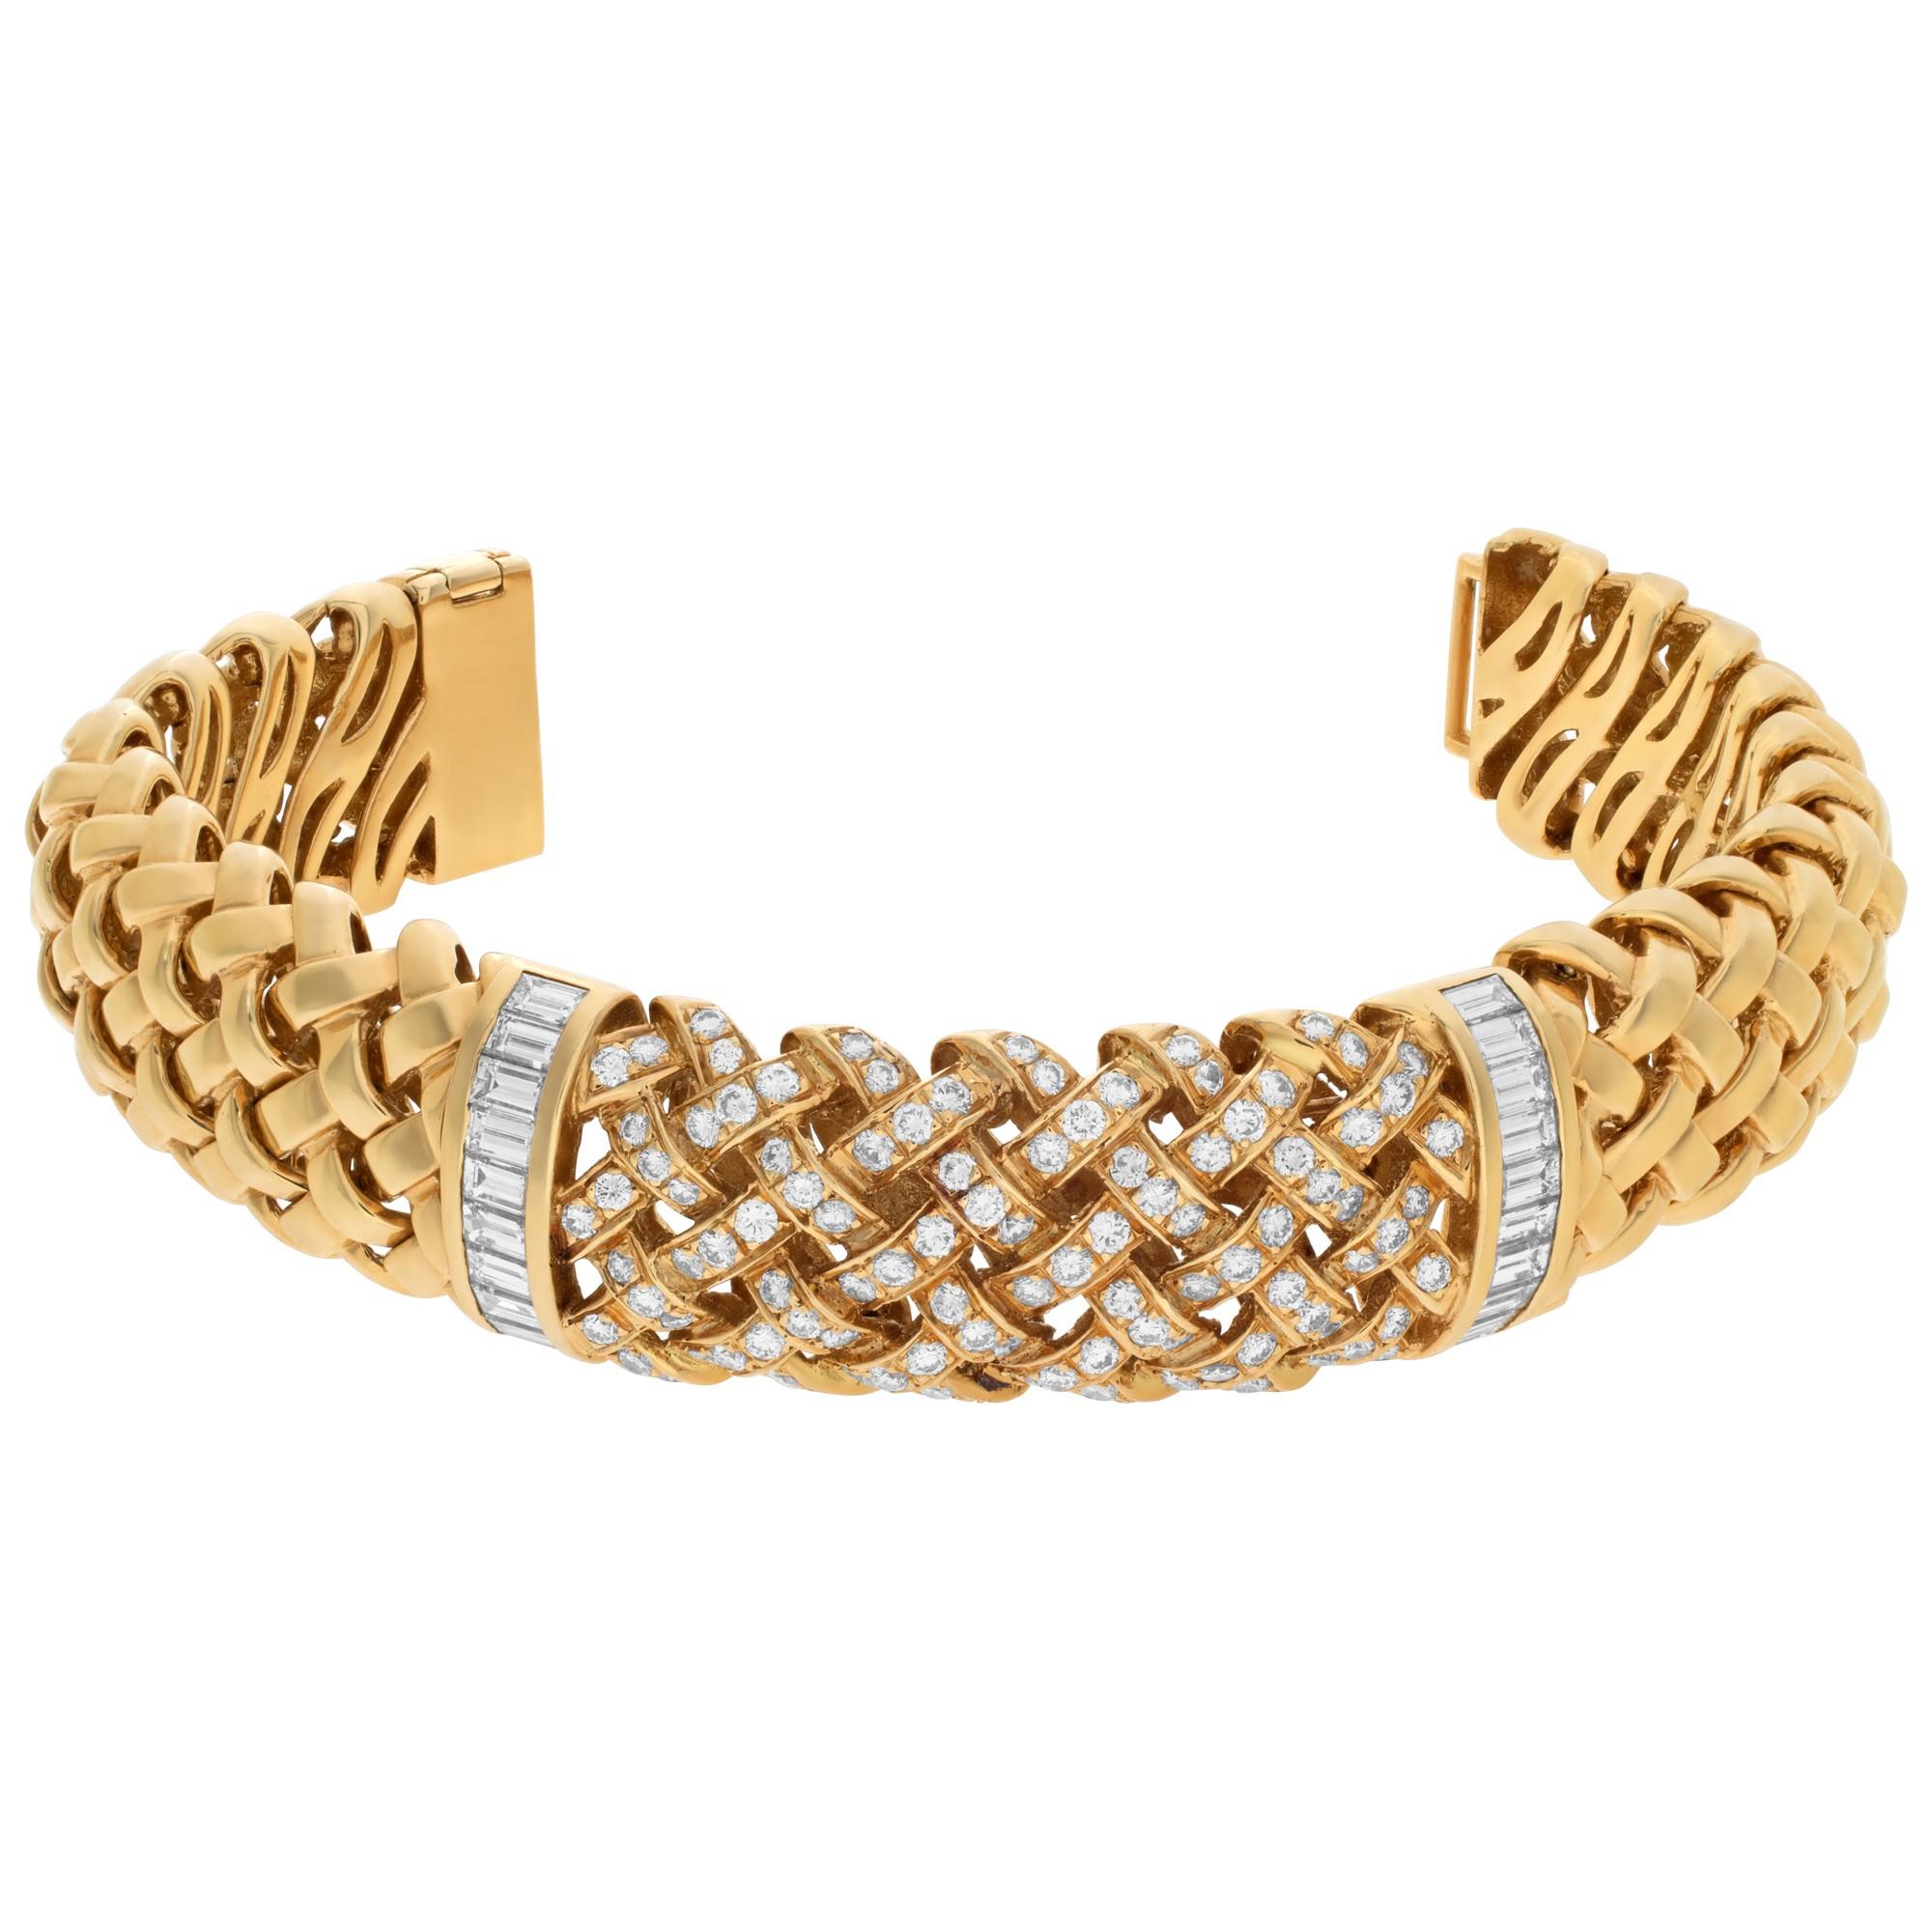 Brilliant Cut Tiffany & Co. Vannerie Collection Bracelet in 18K Yellow Gold and Diamonds